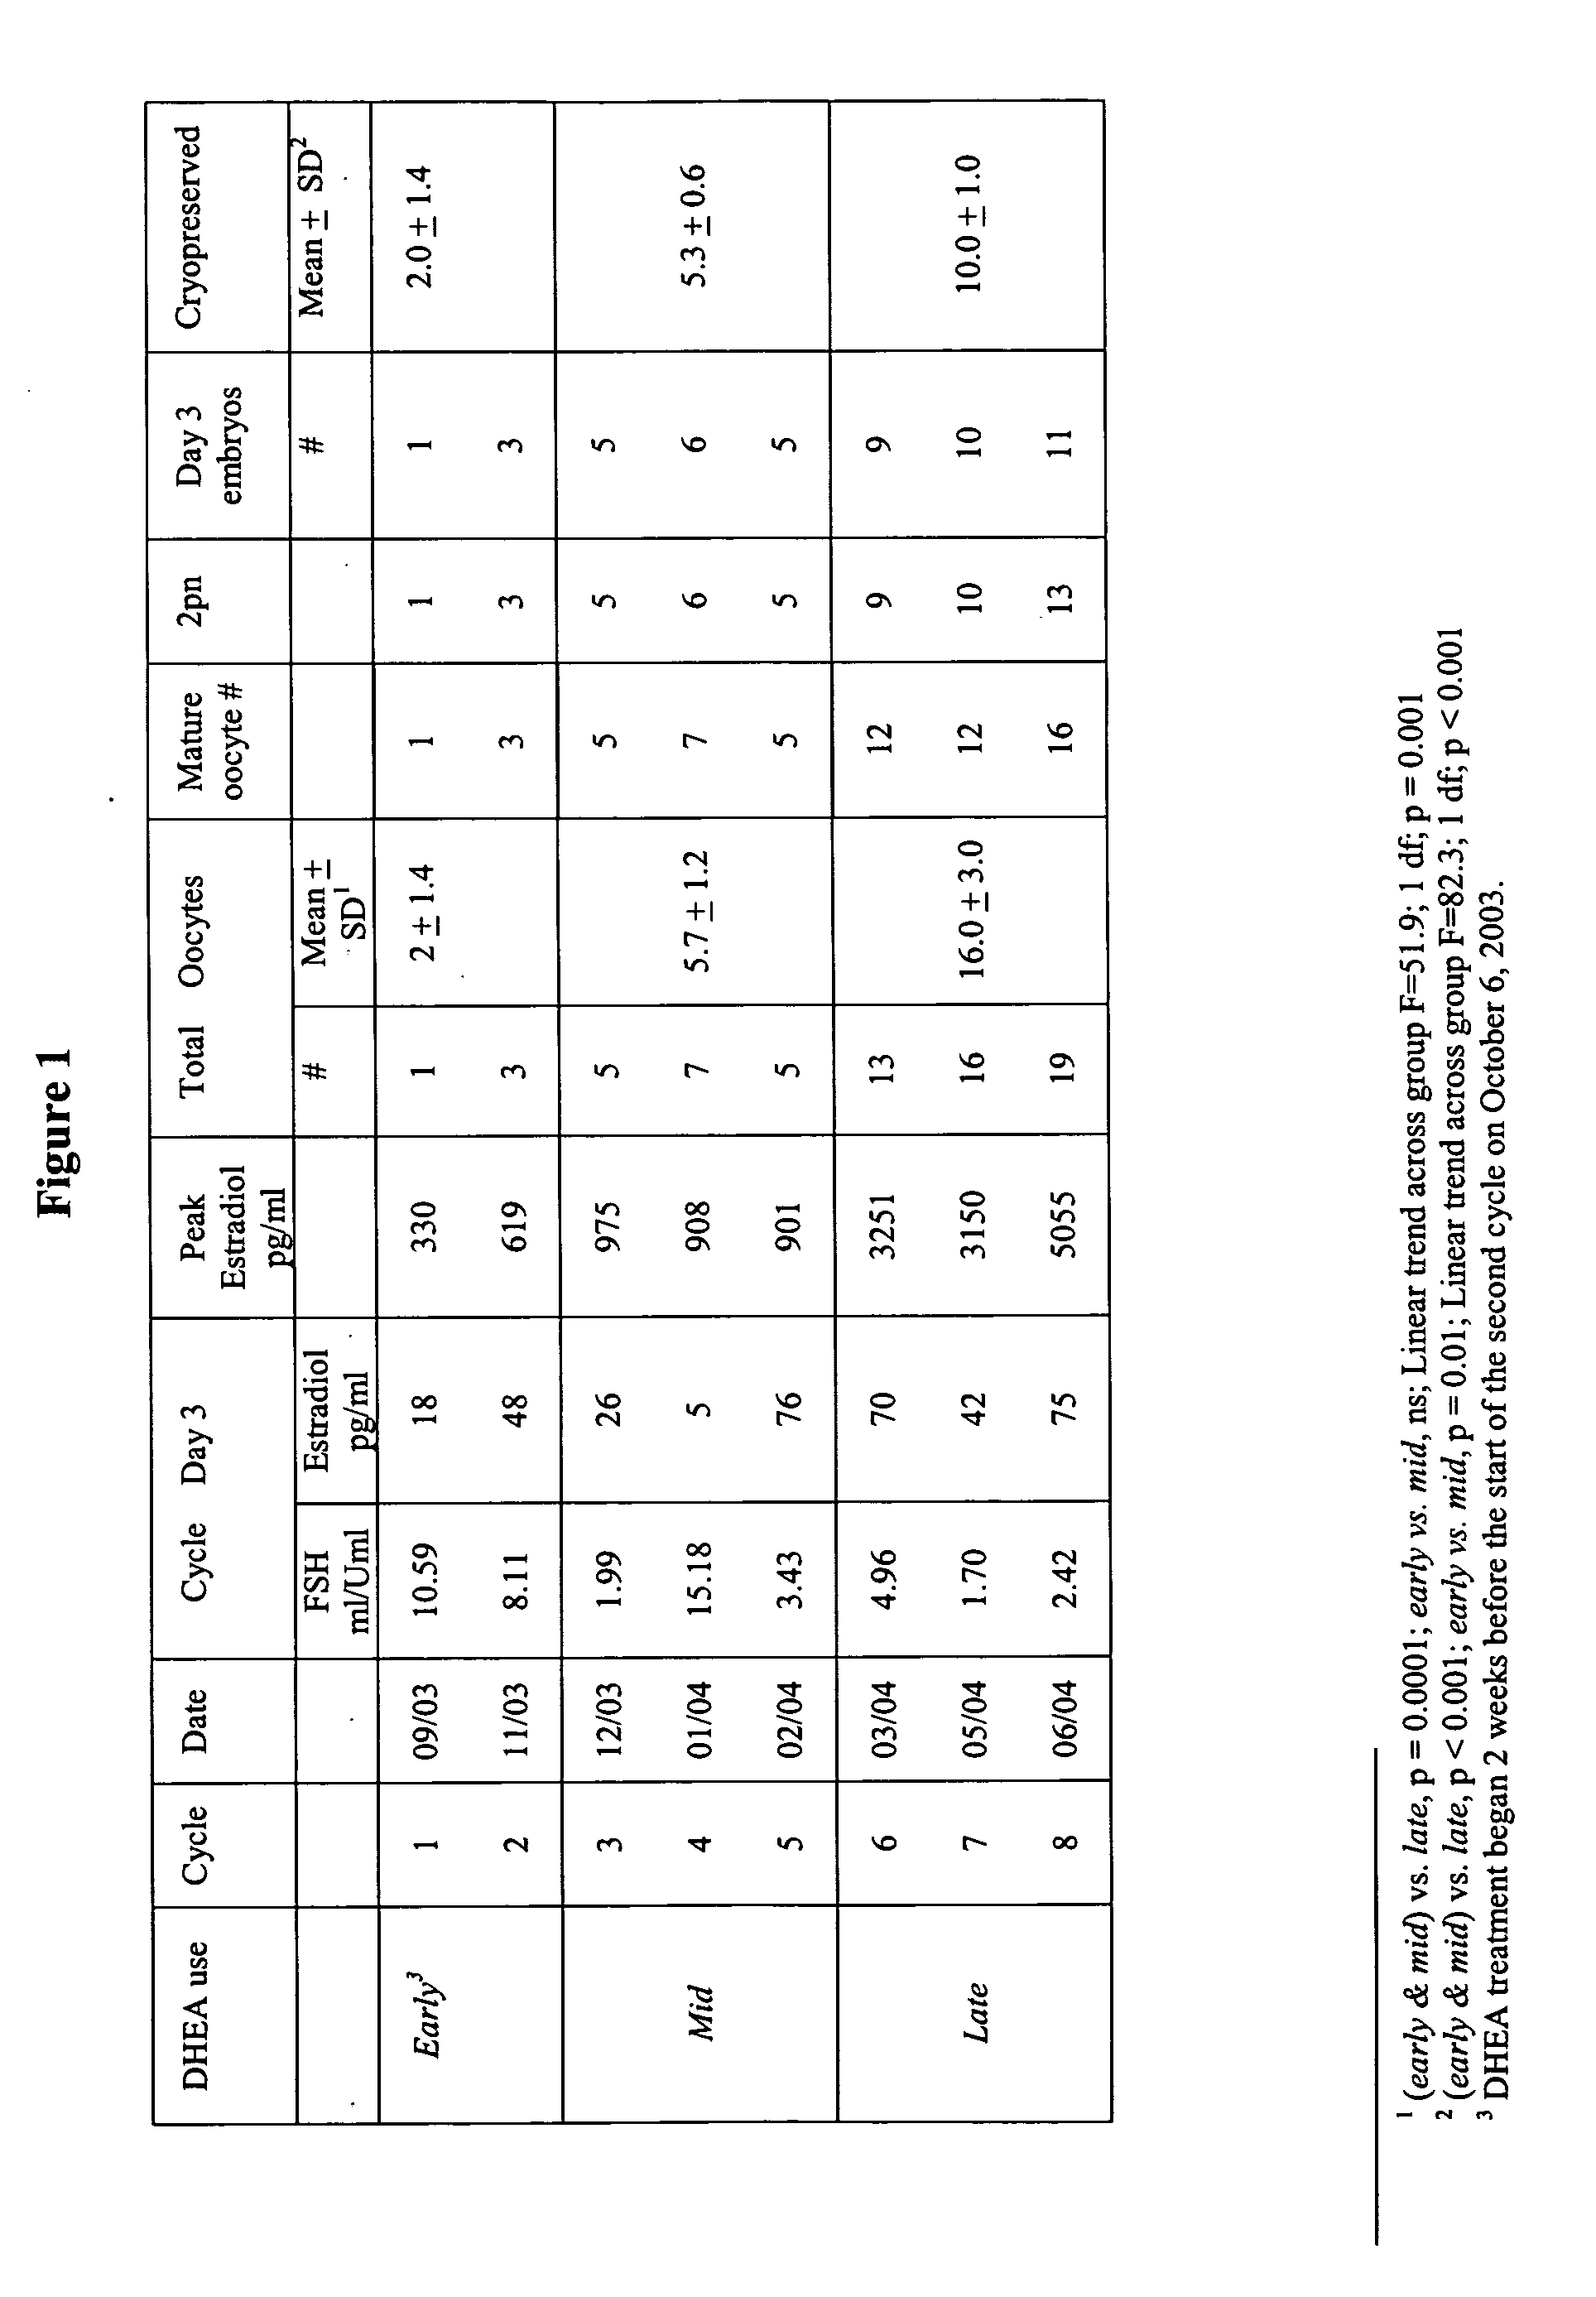 Method of improving ovulation induction using an androgen such as dehydroepiandrosterone